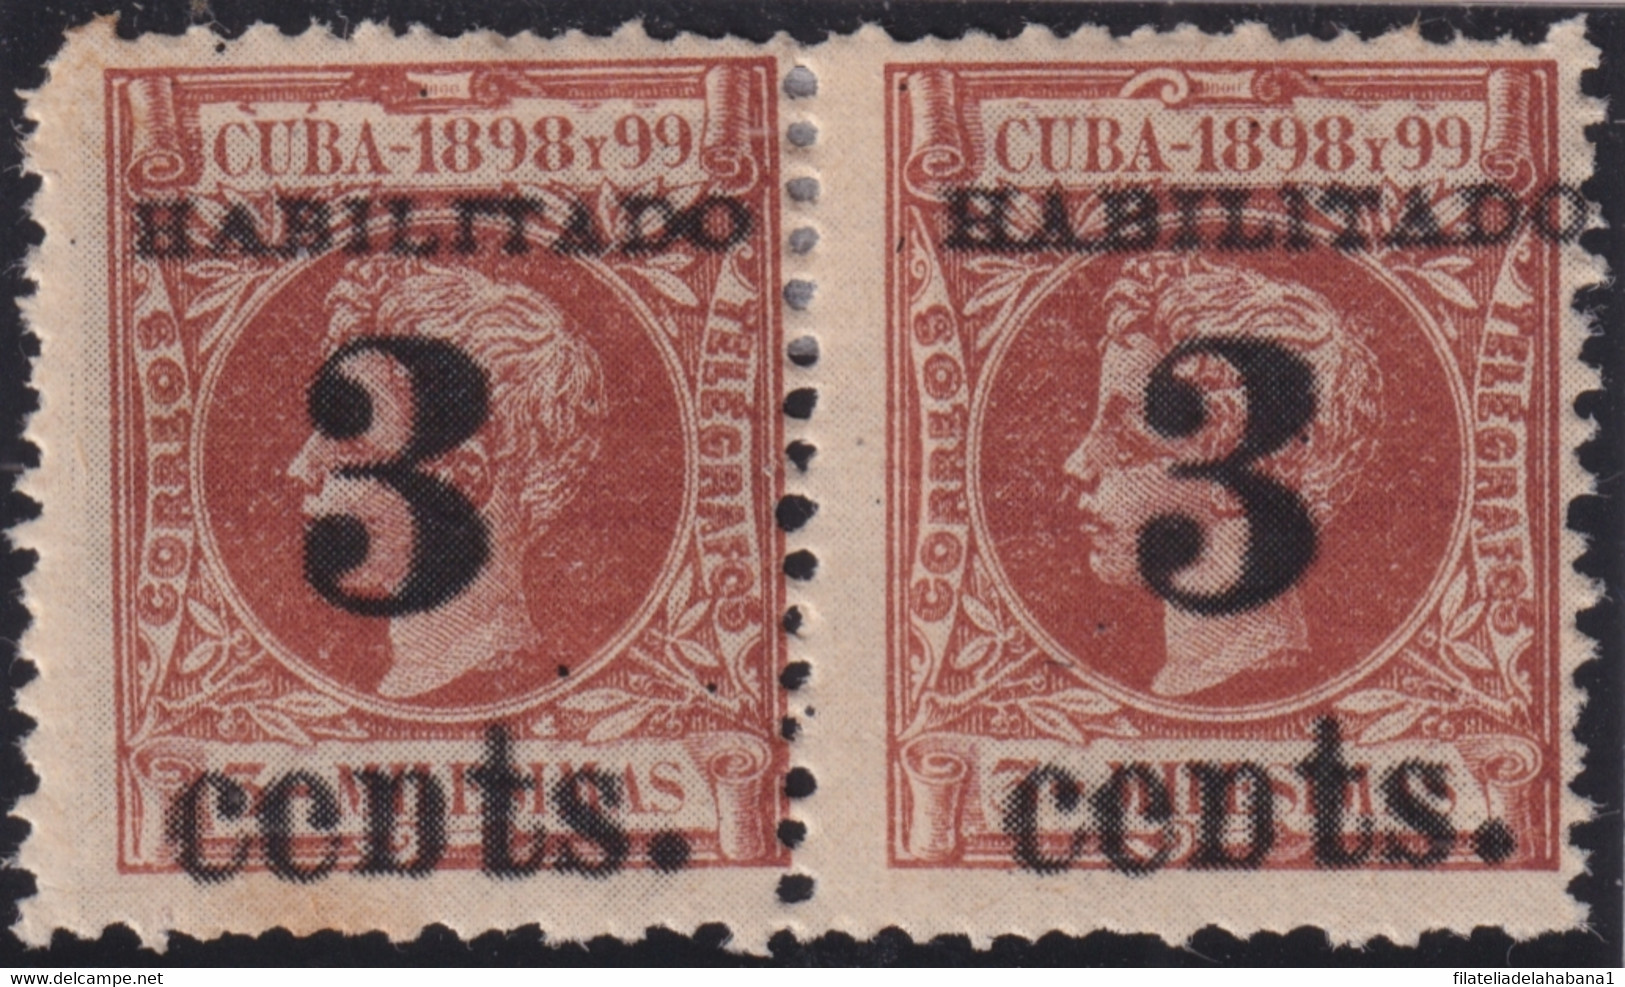 1899-464 CUBA 1899 3c S. 3c PAIR US OCCUPATION FIRST ISSUE PHILATELIC FORGERY. - Neufs